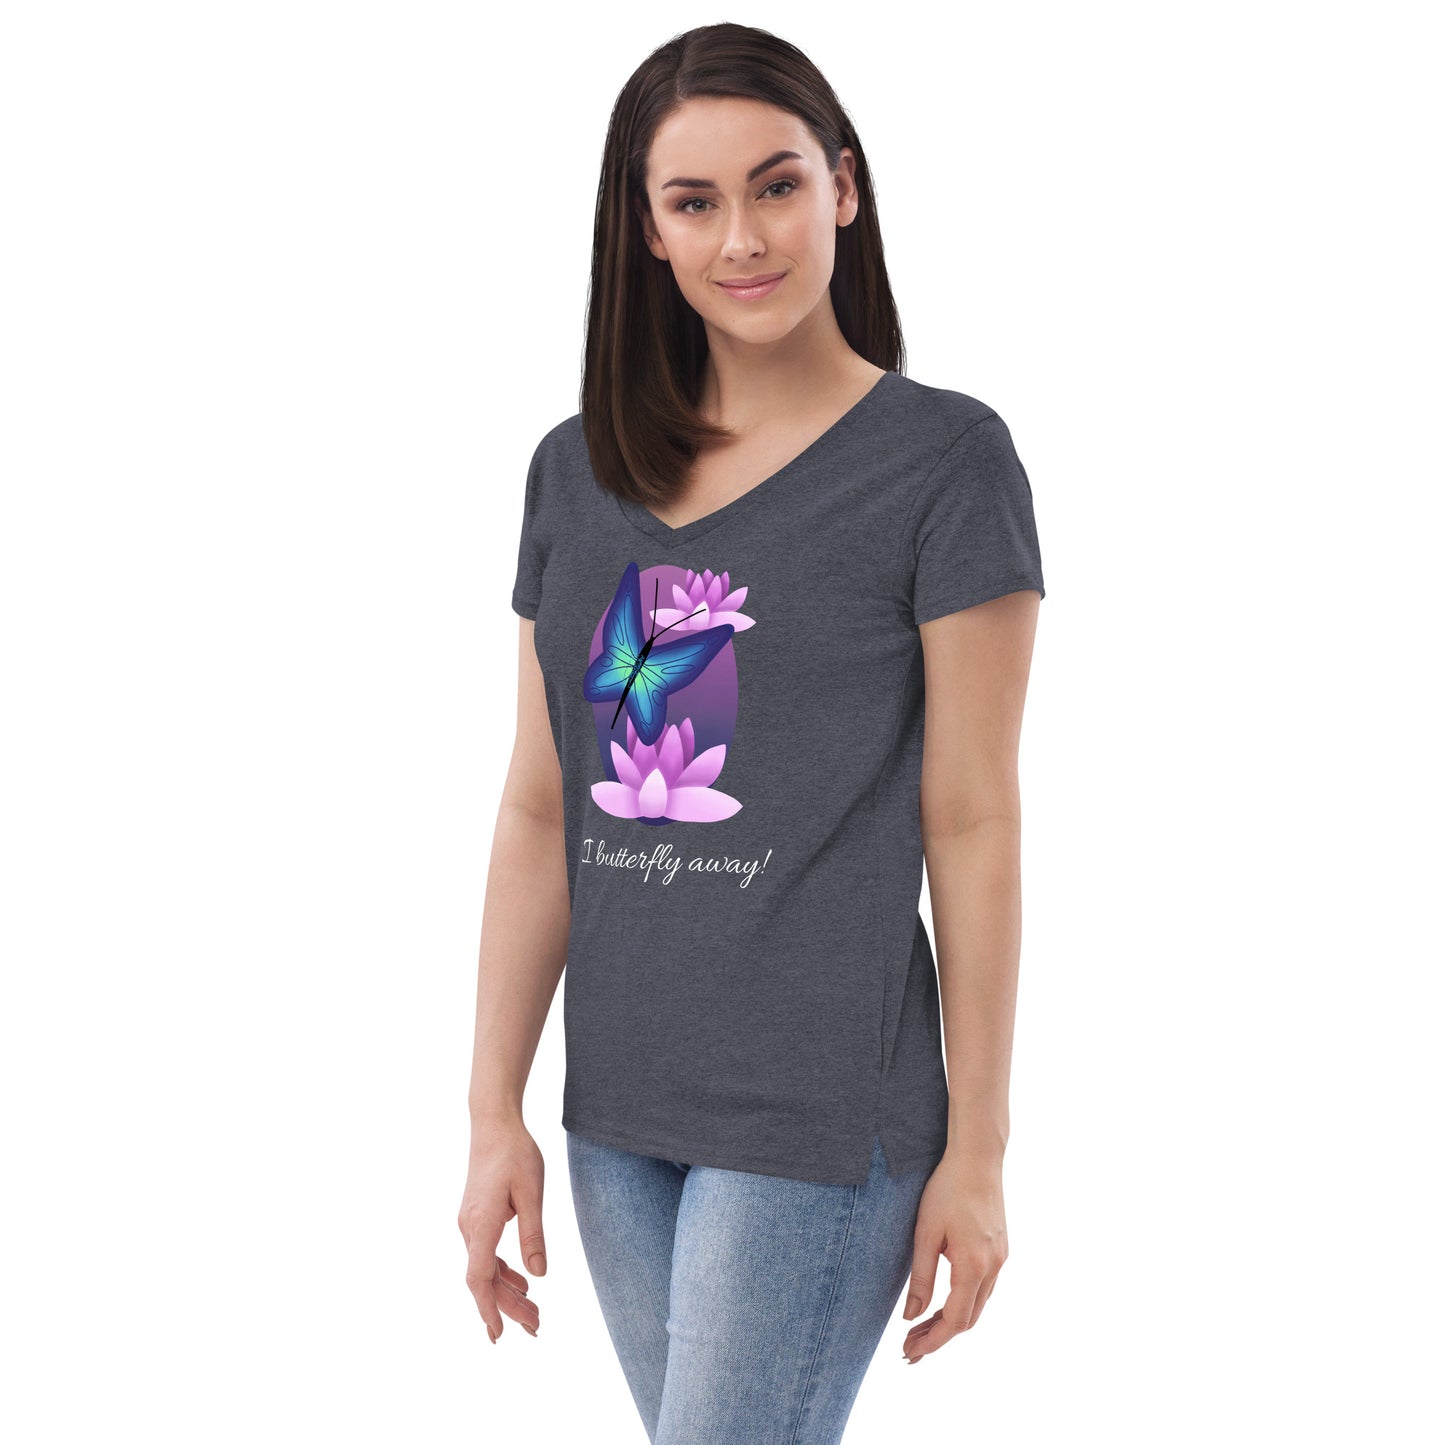 I butterfly away - Women’s recycled V-neck t-shirt